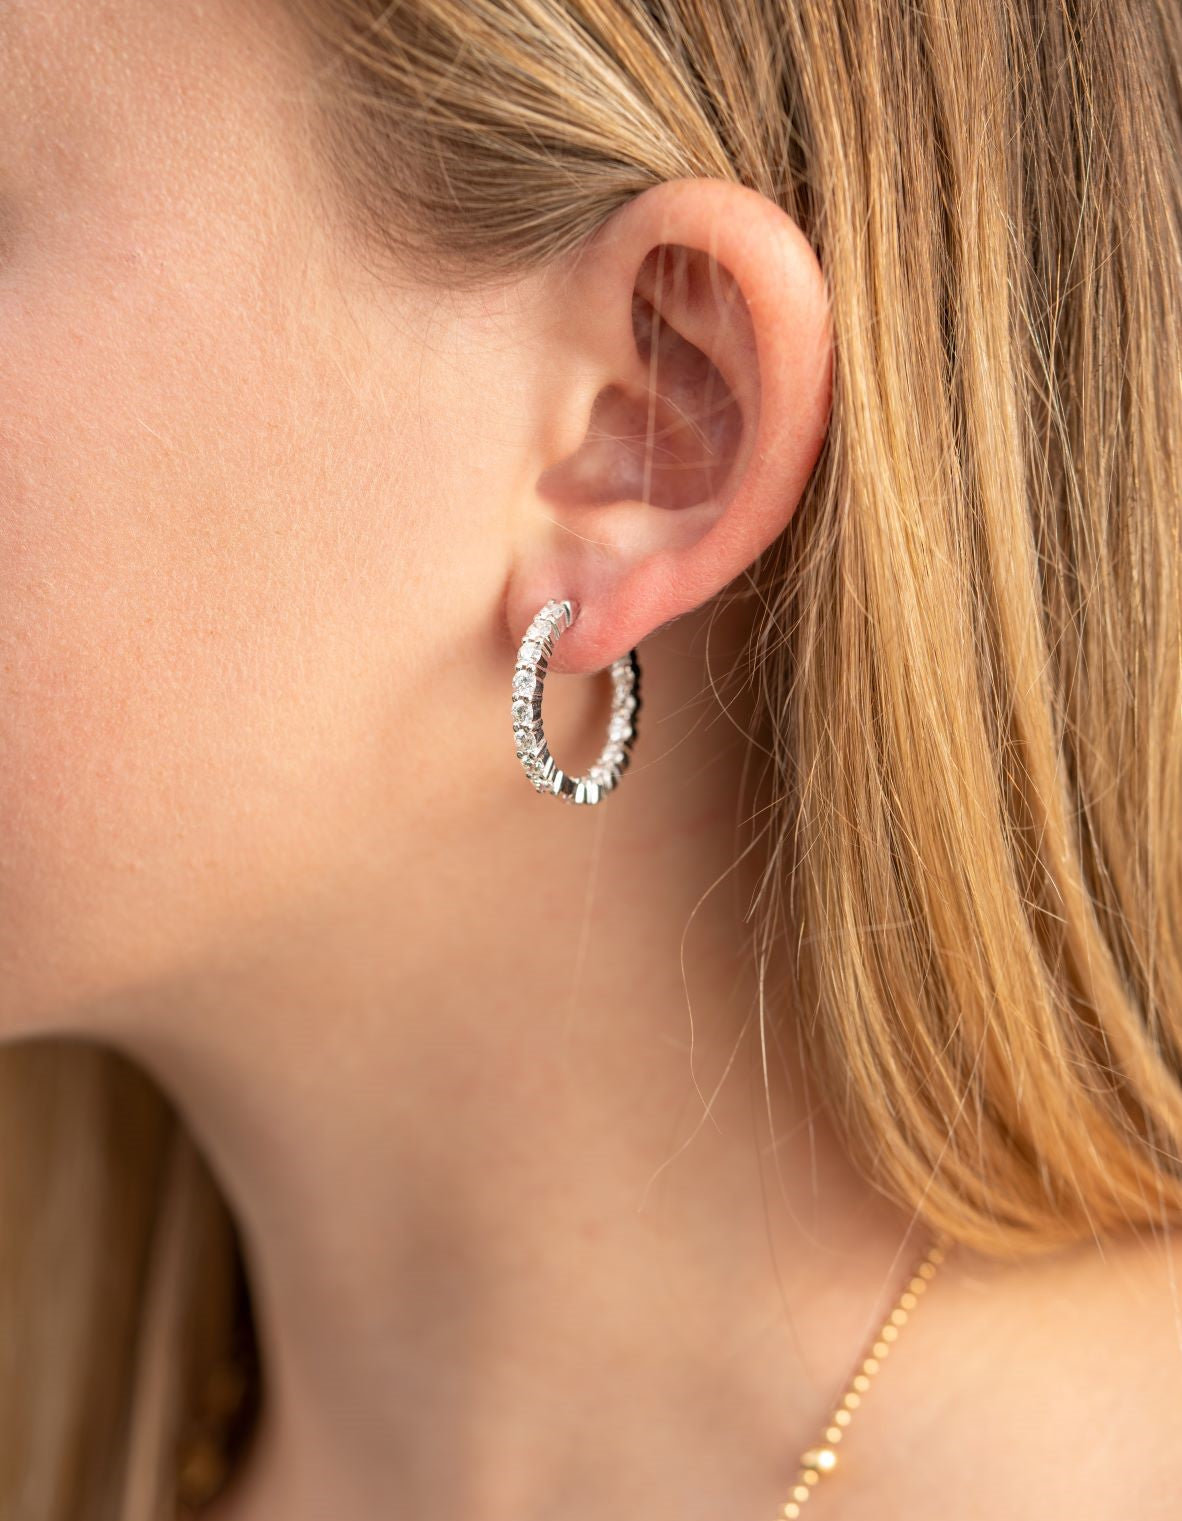 The Best Earrings For Your Face Shape: Square, Round, Oval